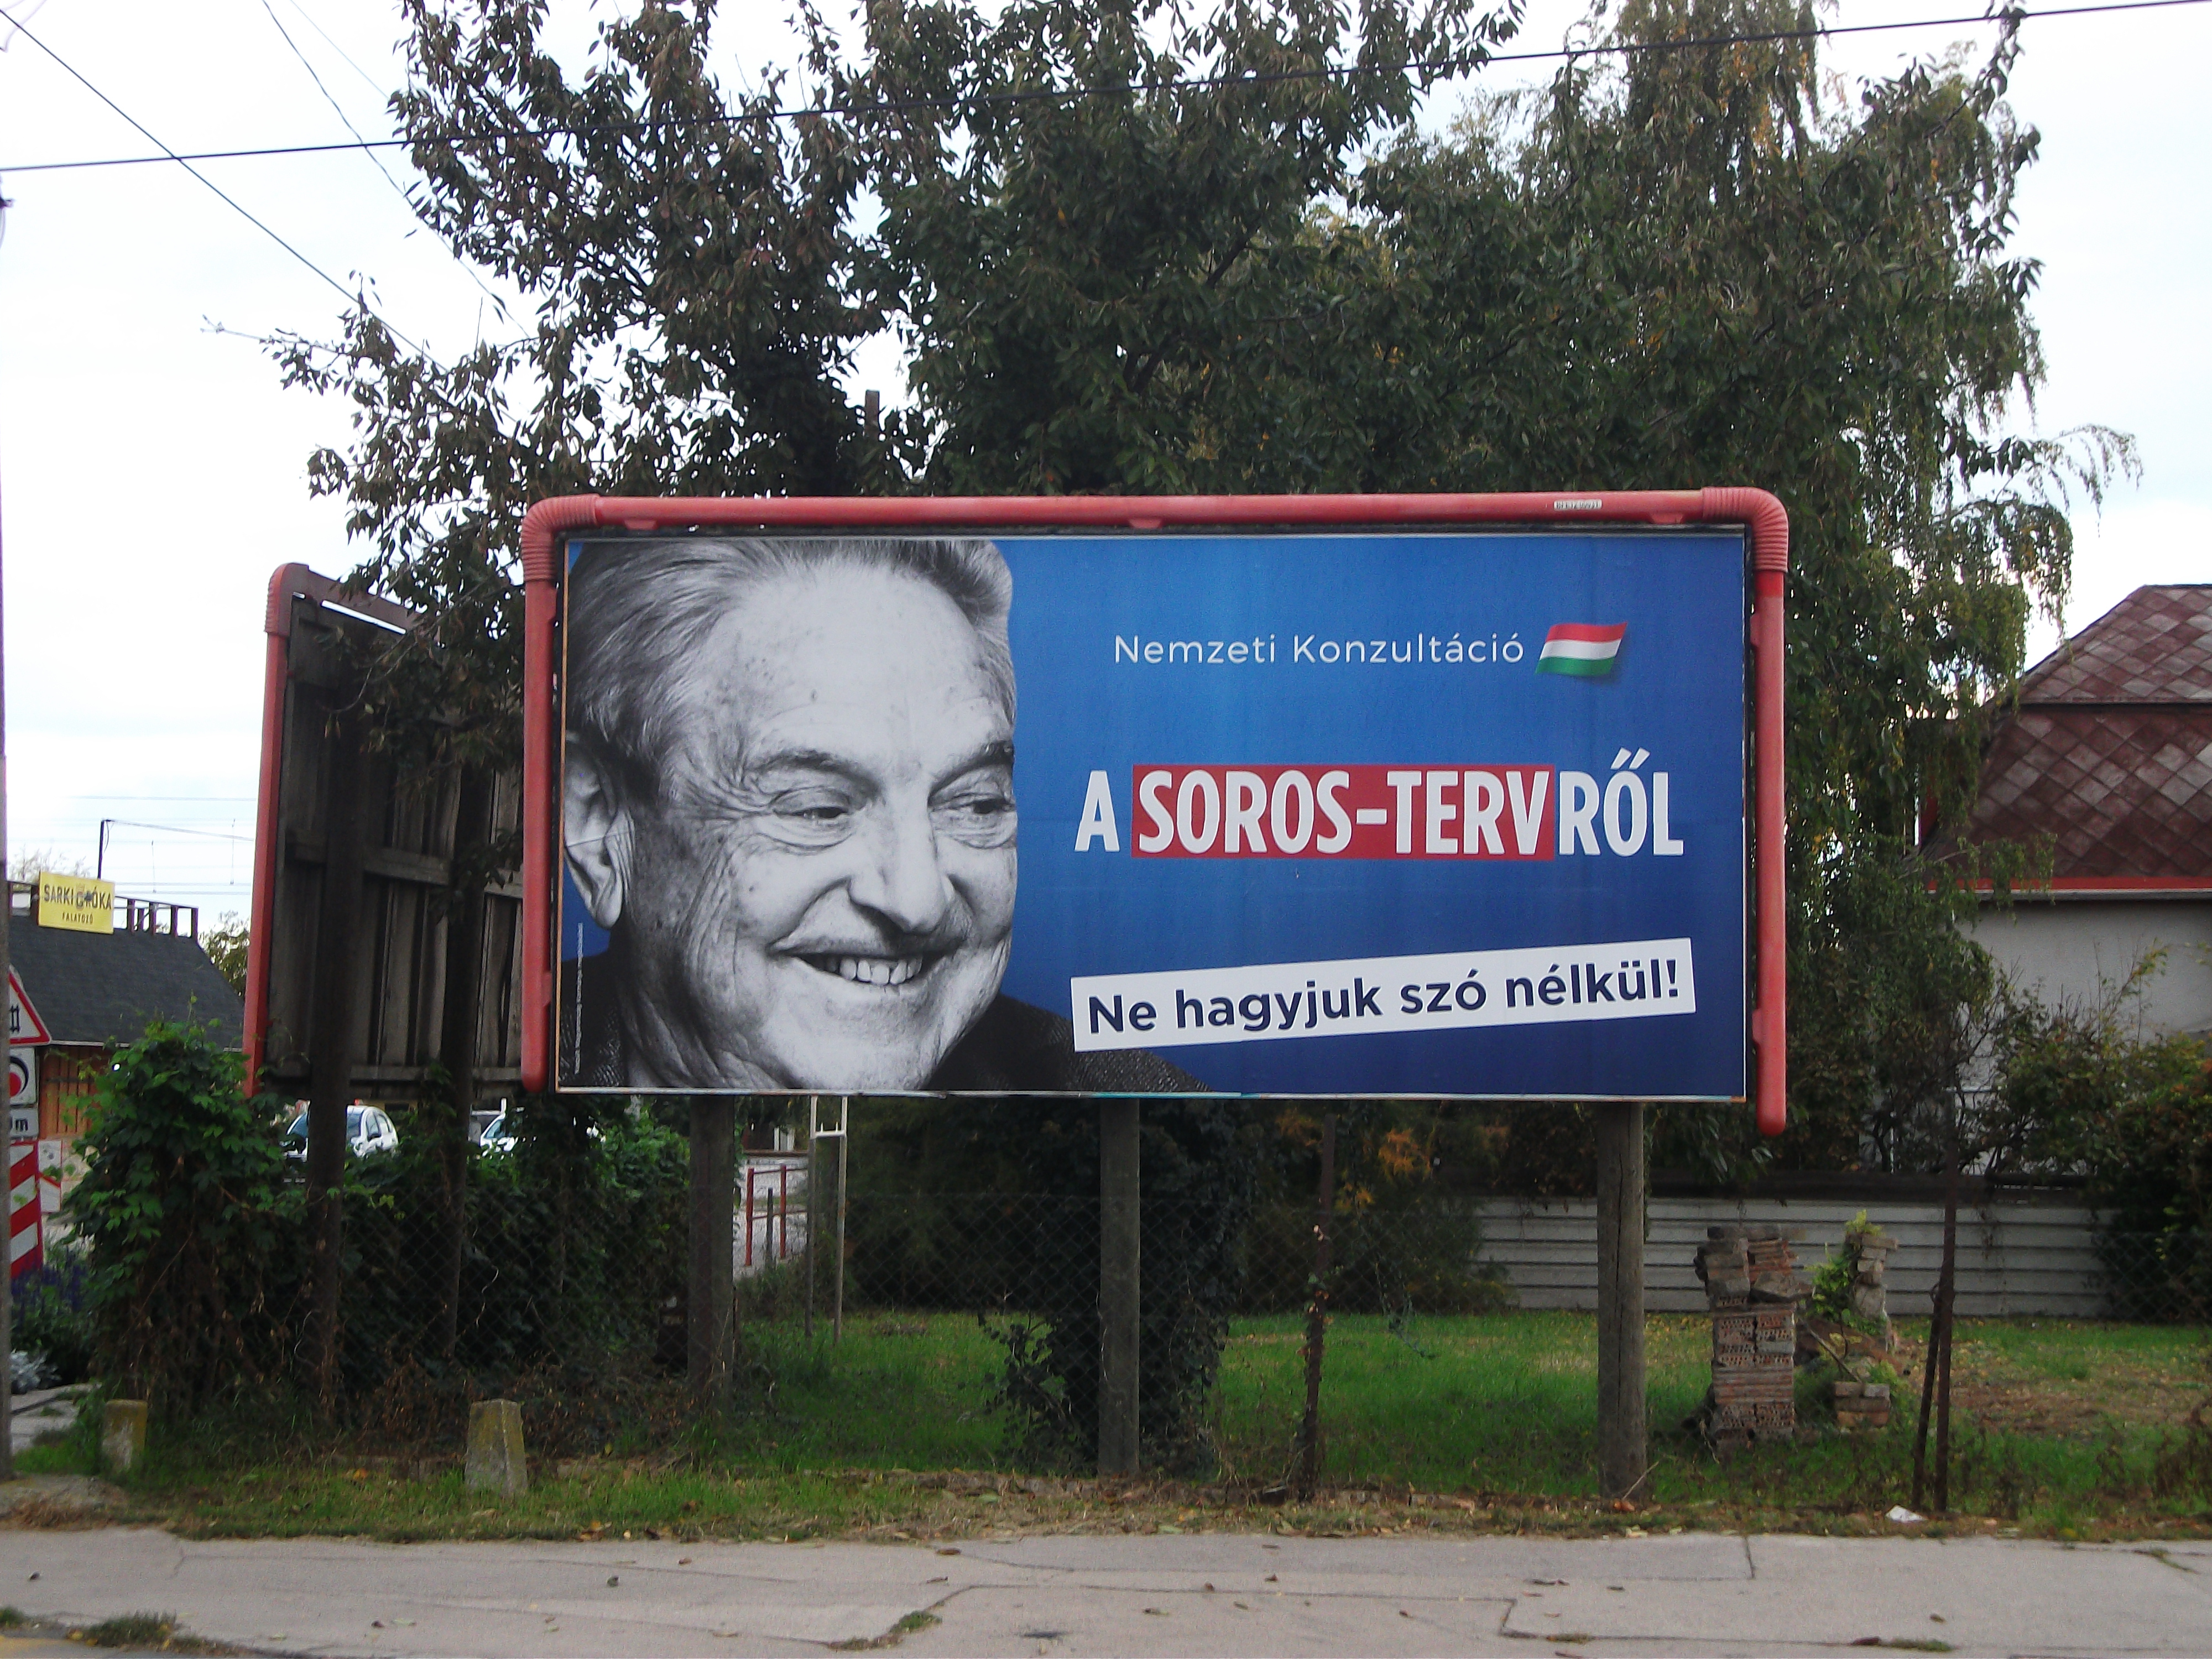 Local Opinion: Government May Scale Back Its Anti-Soros Campaign